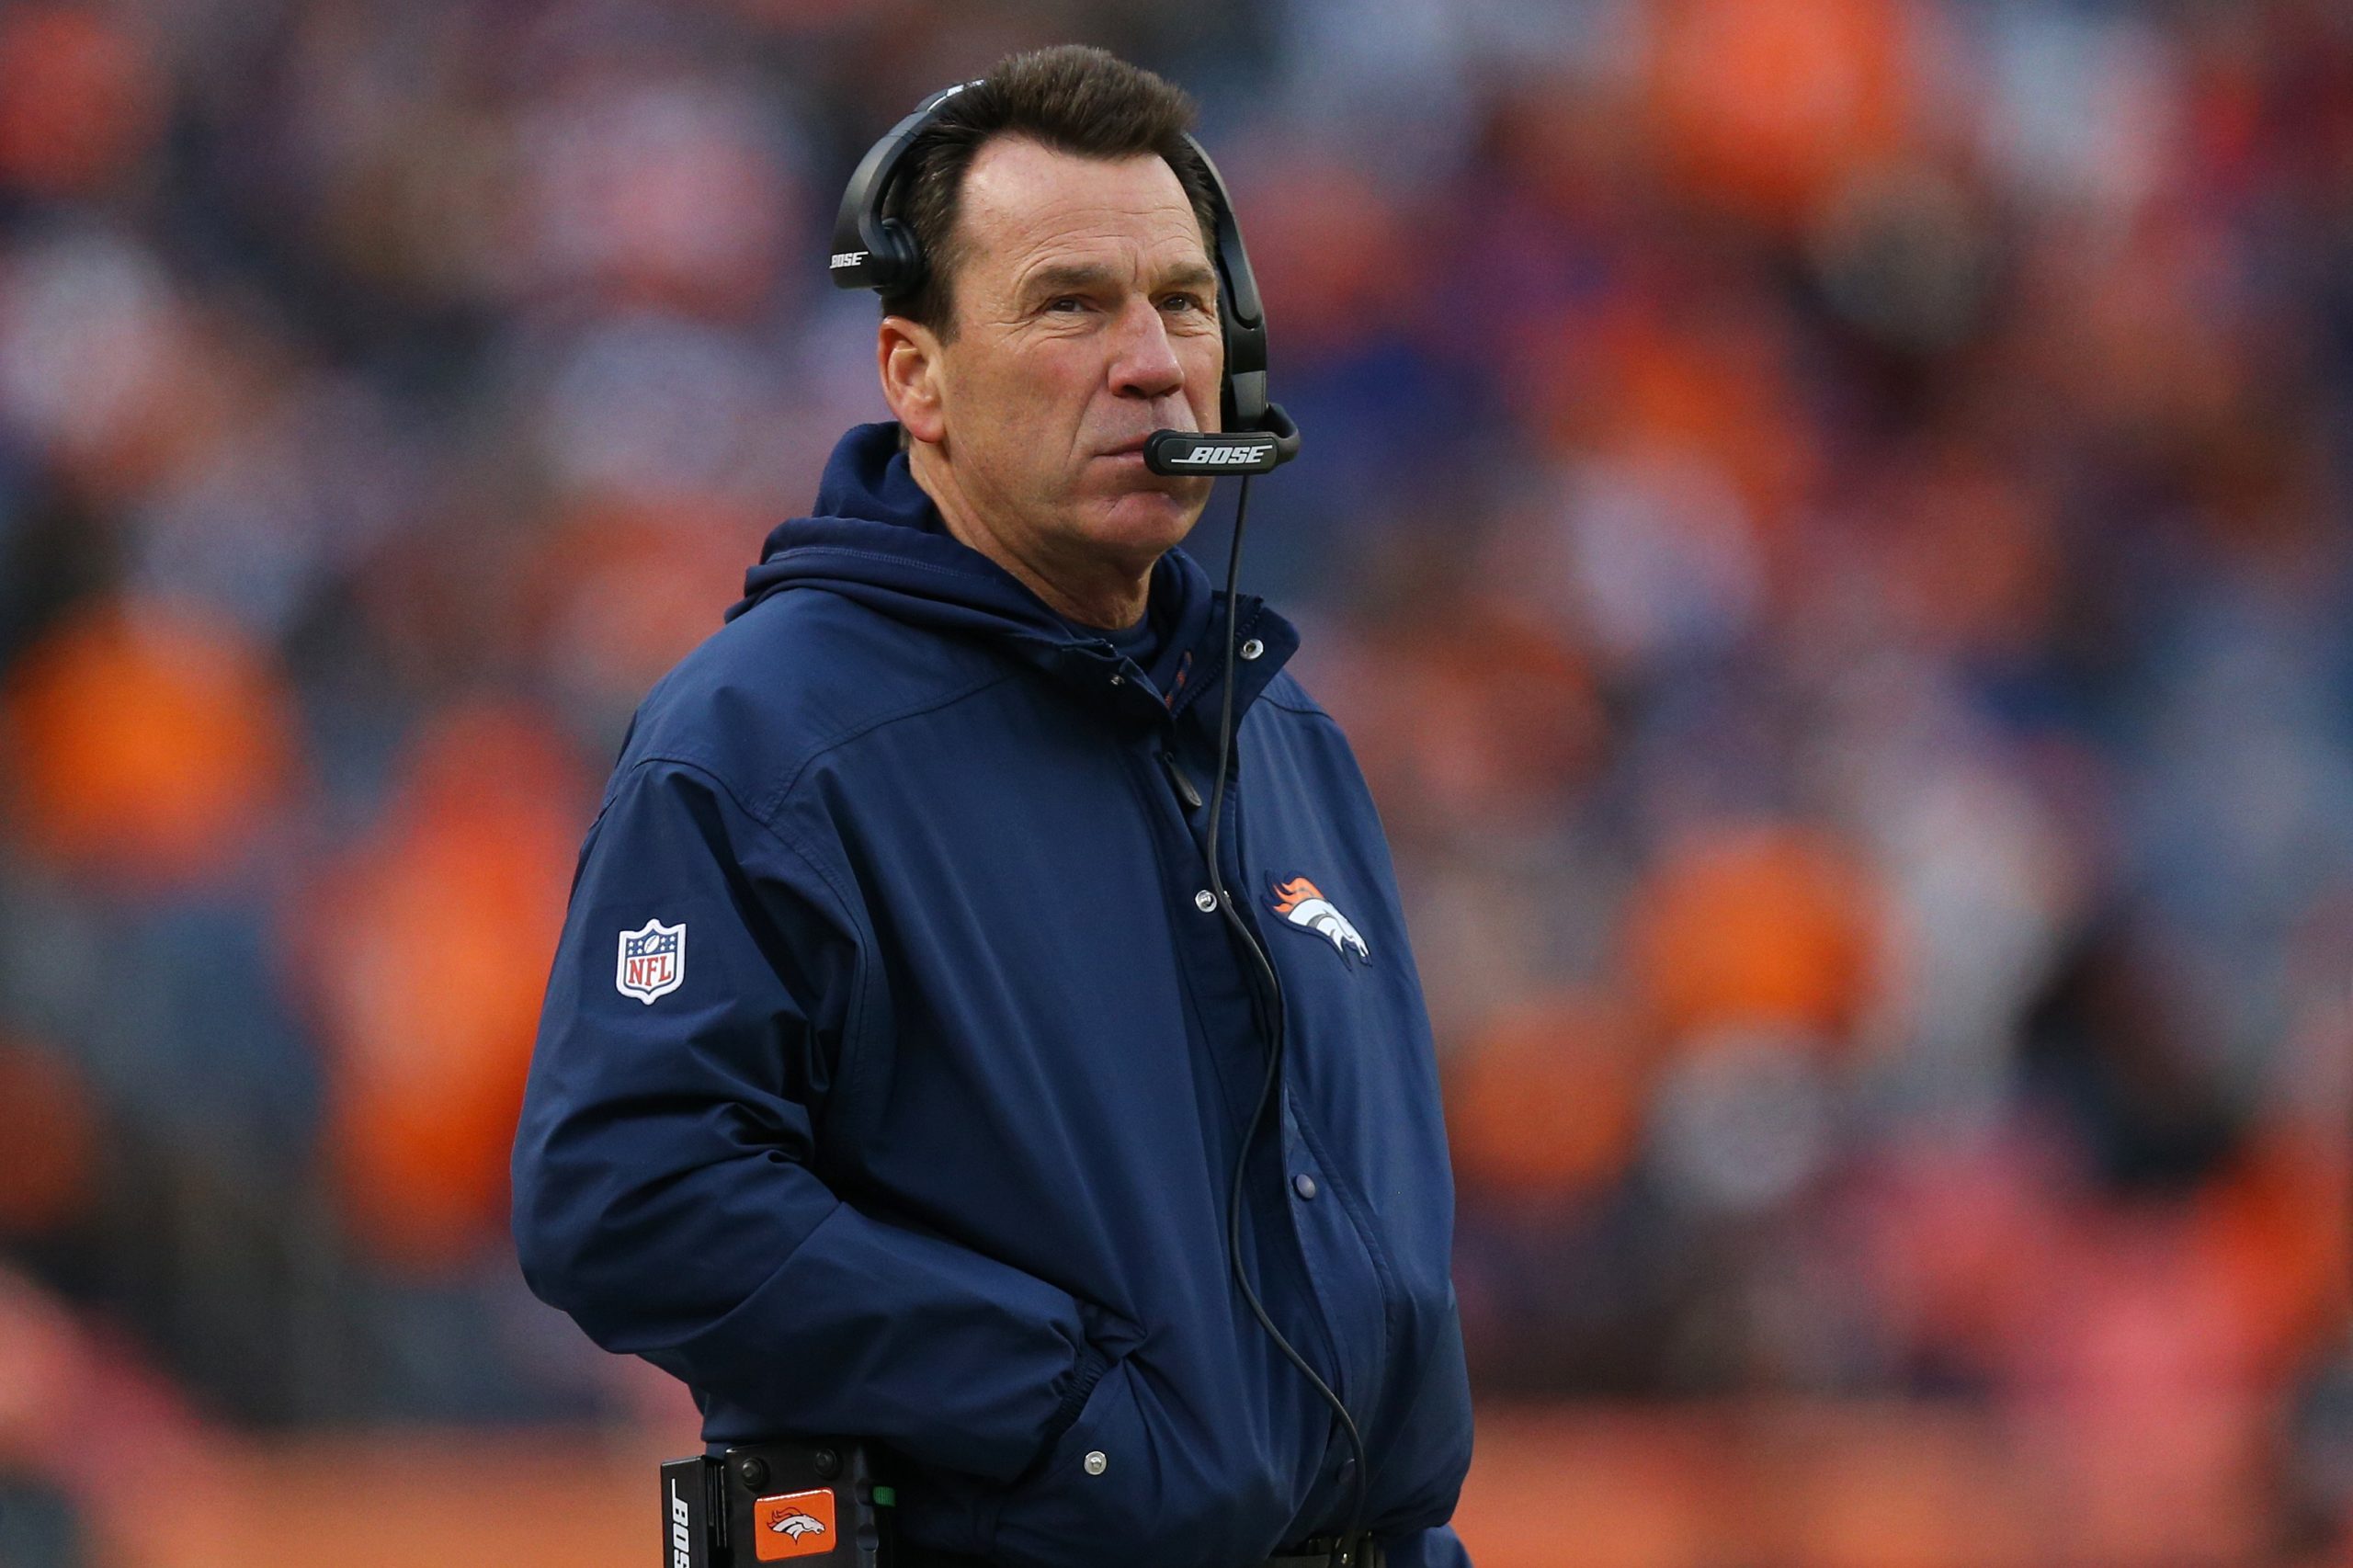 DENVER, CO - JANUARY 1: Head coach Gary Kubiak of the Denver Broncos in the third quarter of the game against the Oakland Raiders at Sports Authority Field at Mile High on January 1, 2017 in Denver, Colorado. Justin Edmonds/Getty Images